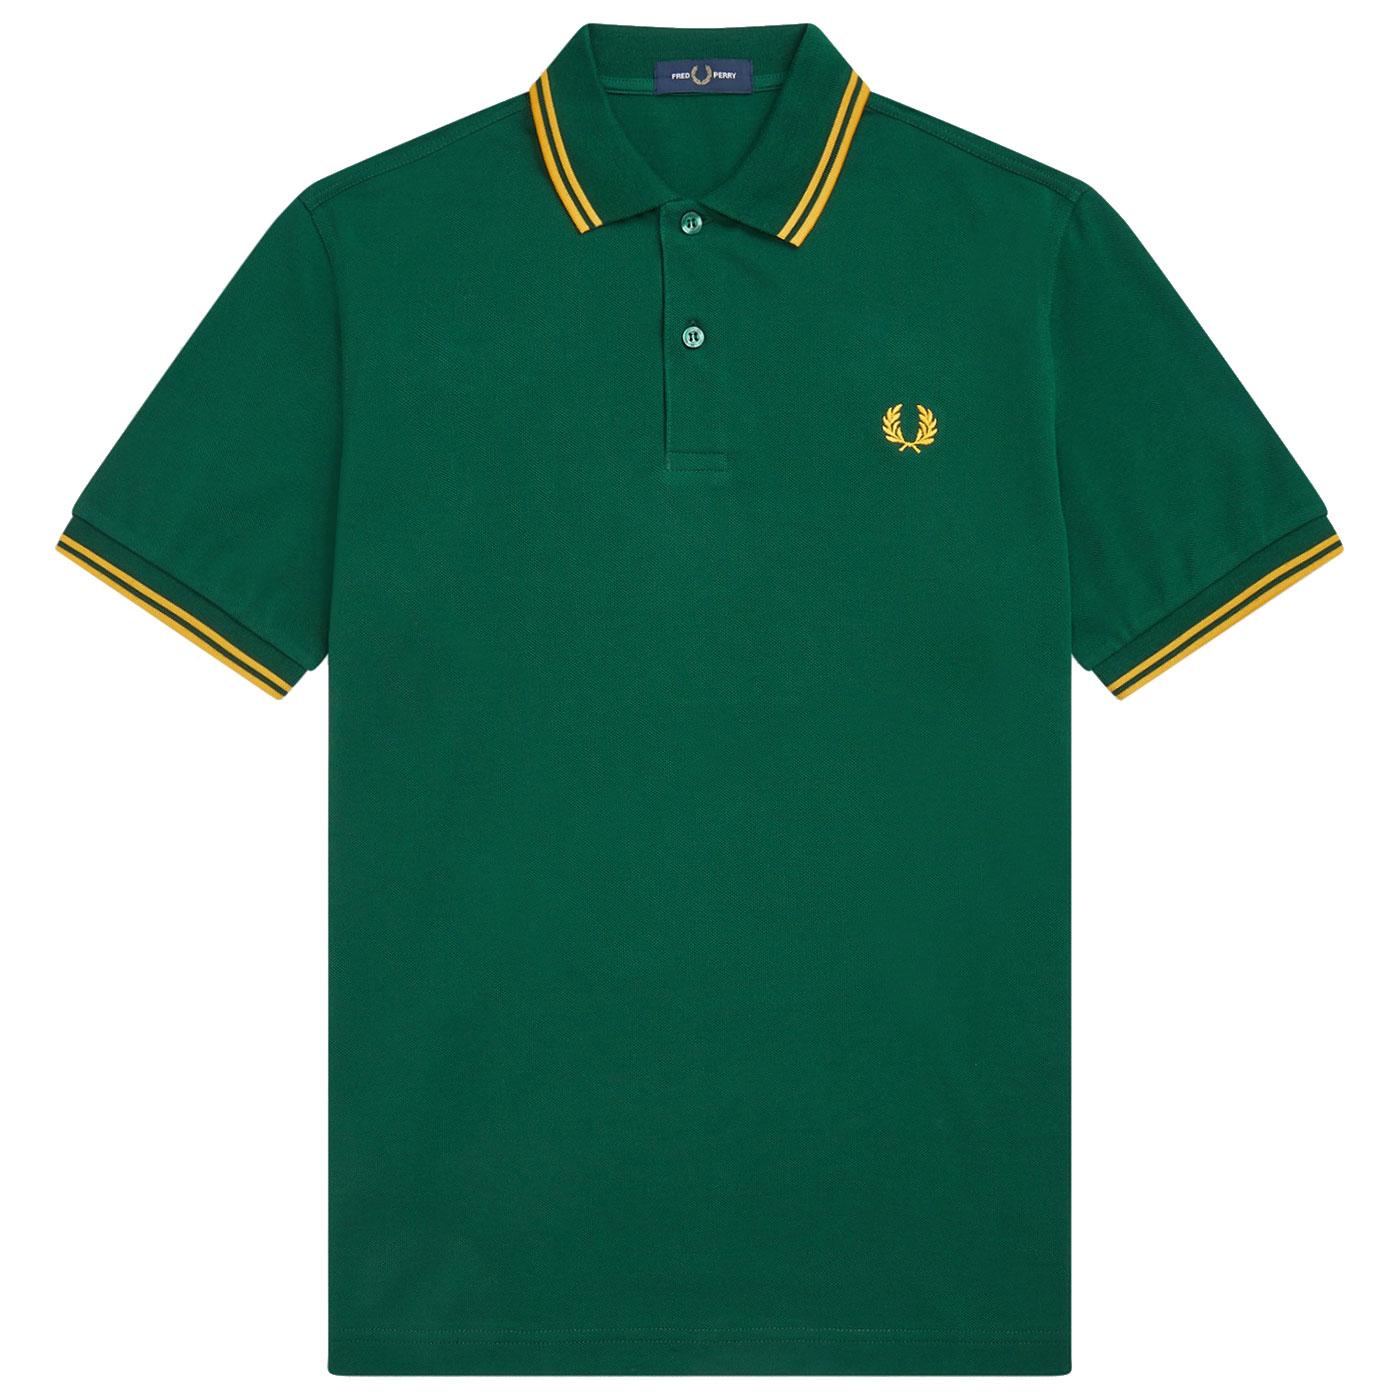 FRED PERRY M3600 Mod Twin Tipped Pique Polo in Ivy